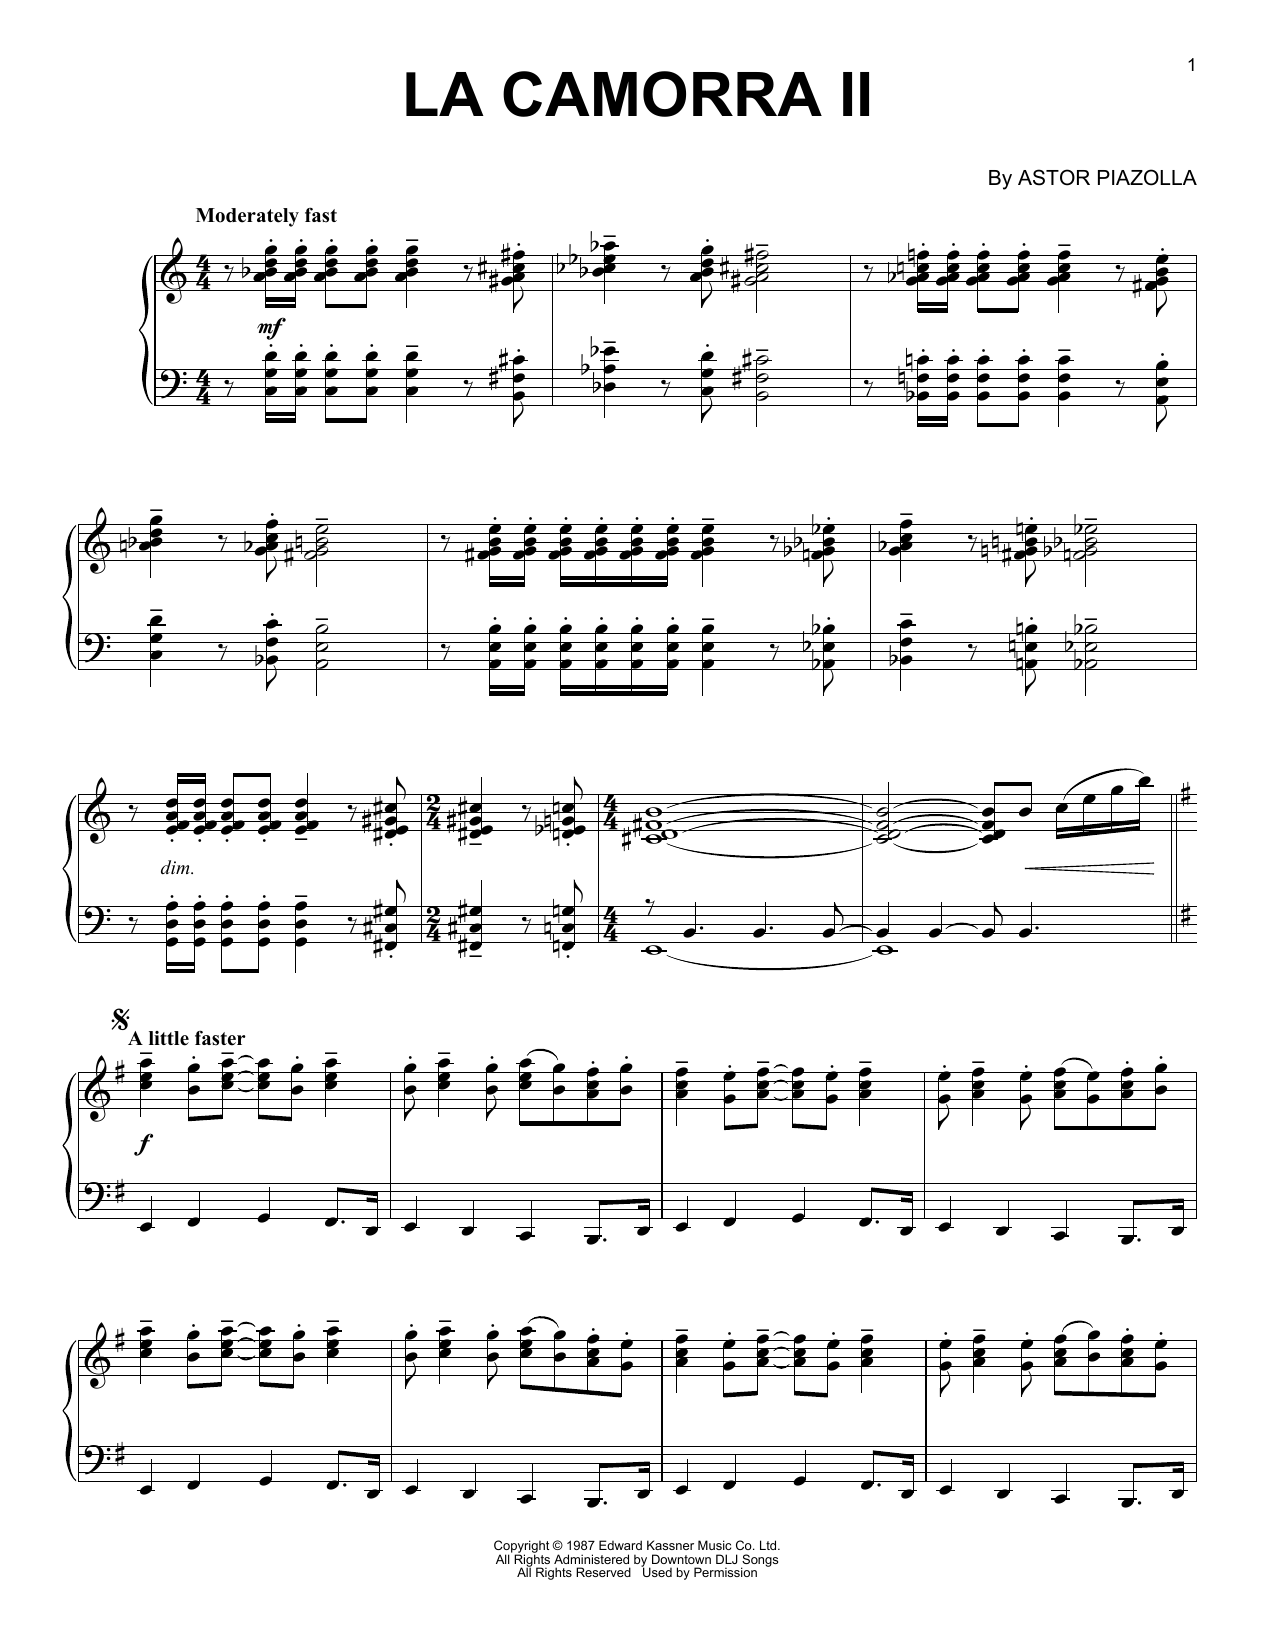 Astor Piazzolla La Camorra II sheet music notes and chords. Download Printable PDF.